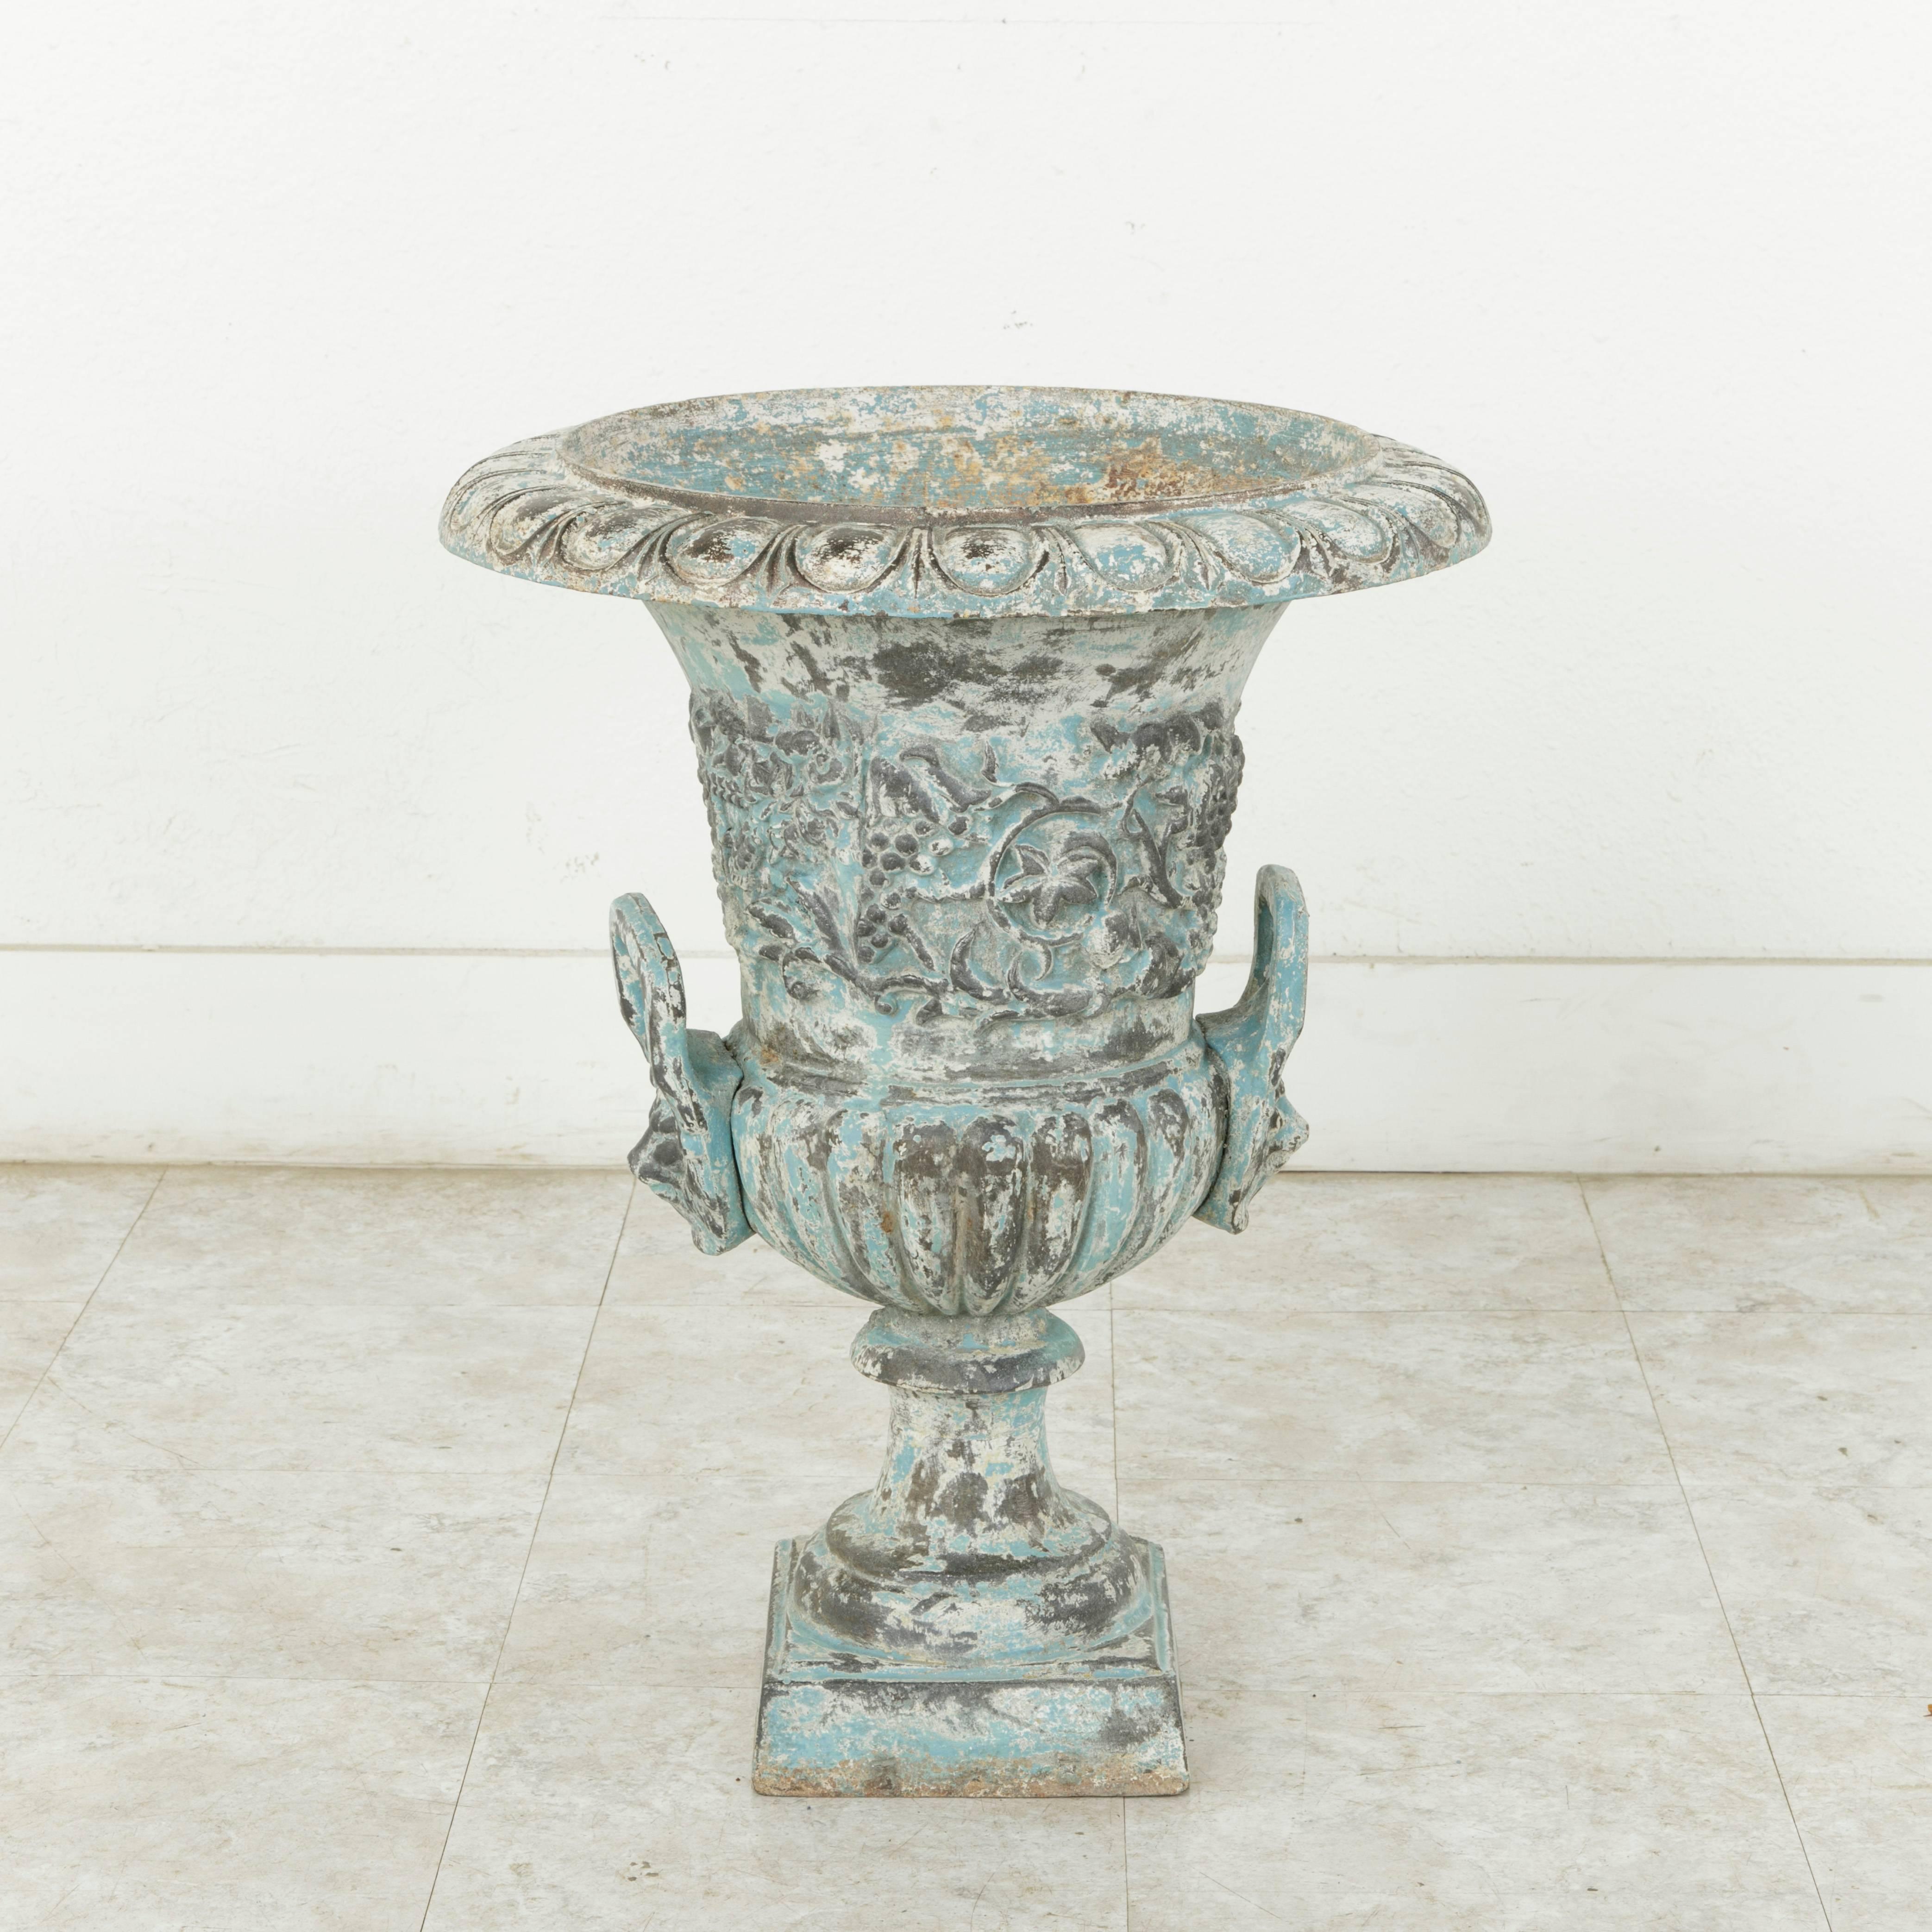 Standing almost 25 inches in height, this large late 18th century French cast iron urn or planter features motifs of grapes, vines, and grape leaves, indicative of its origin in a French vineyard. Each handle bears the head of a lion wearing a